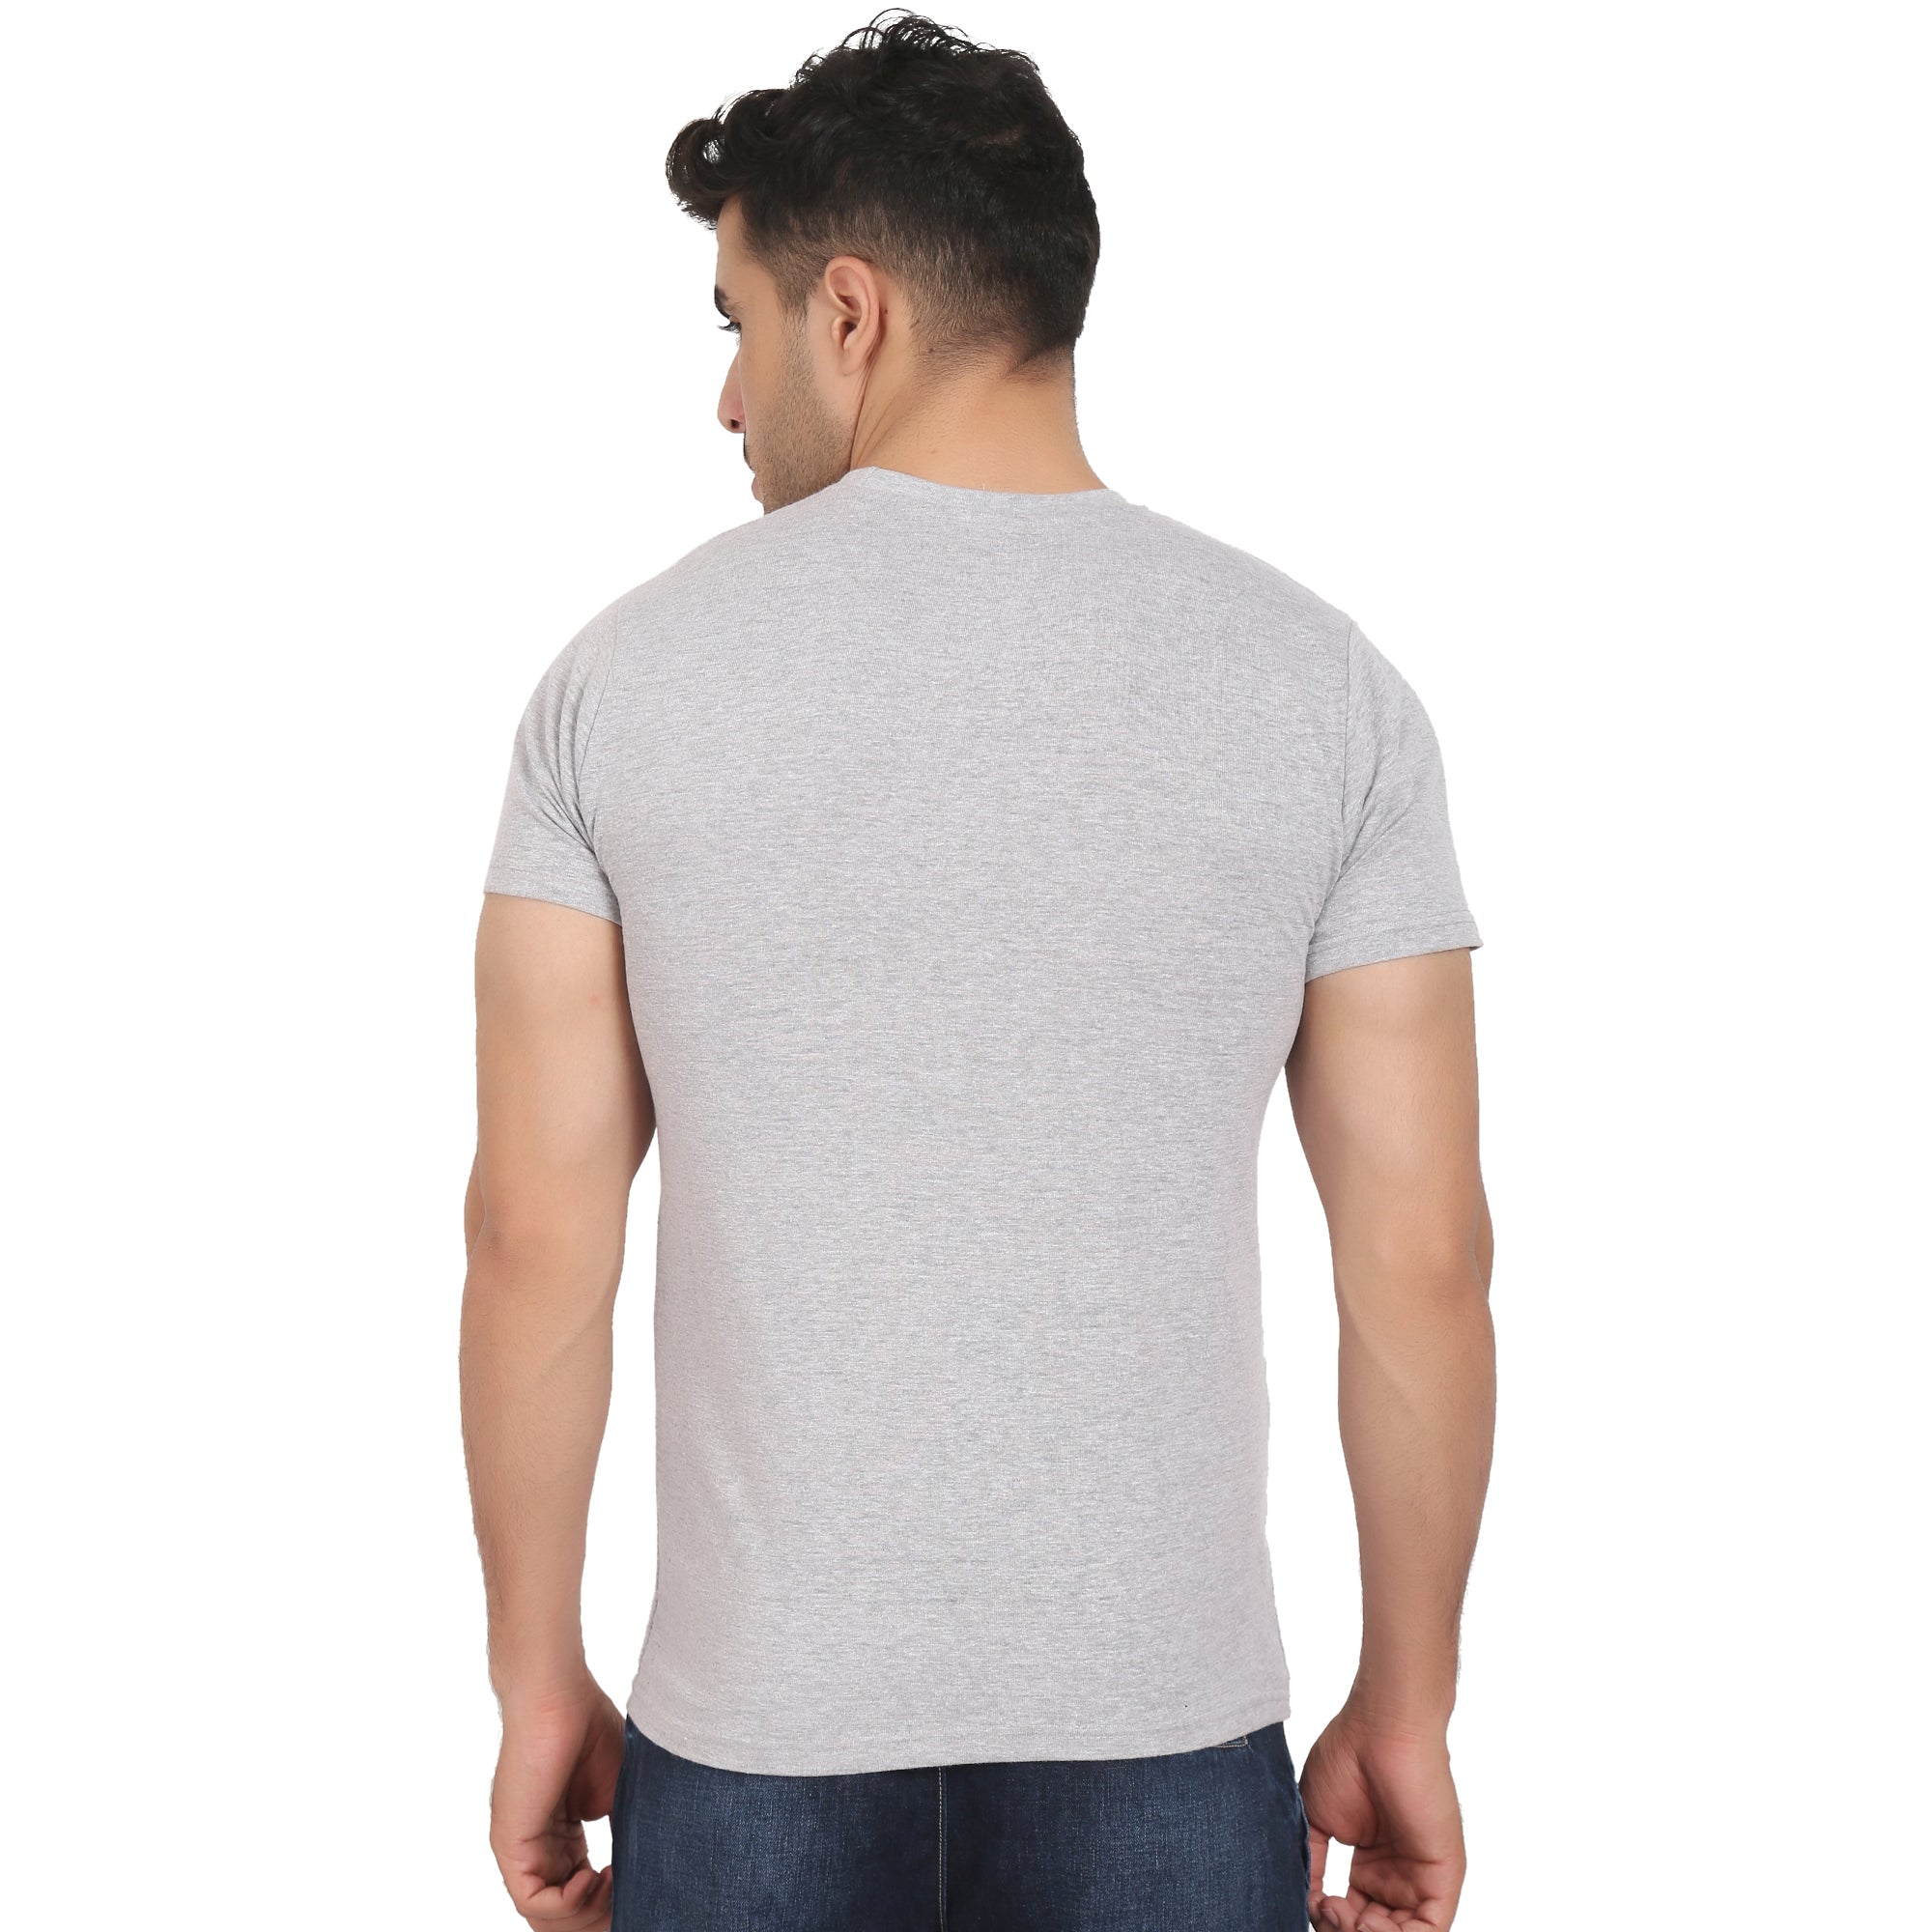 Combo Offer - Men Crew Neck Cotton T-Shirts - Half Sleeves - 3 Colors - Black, White & Grey